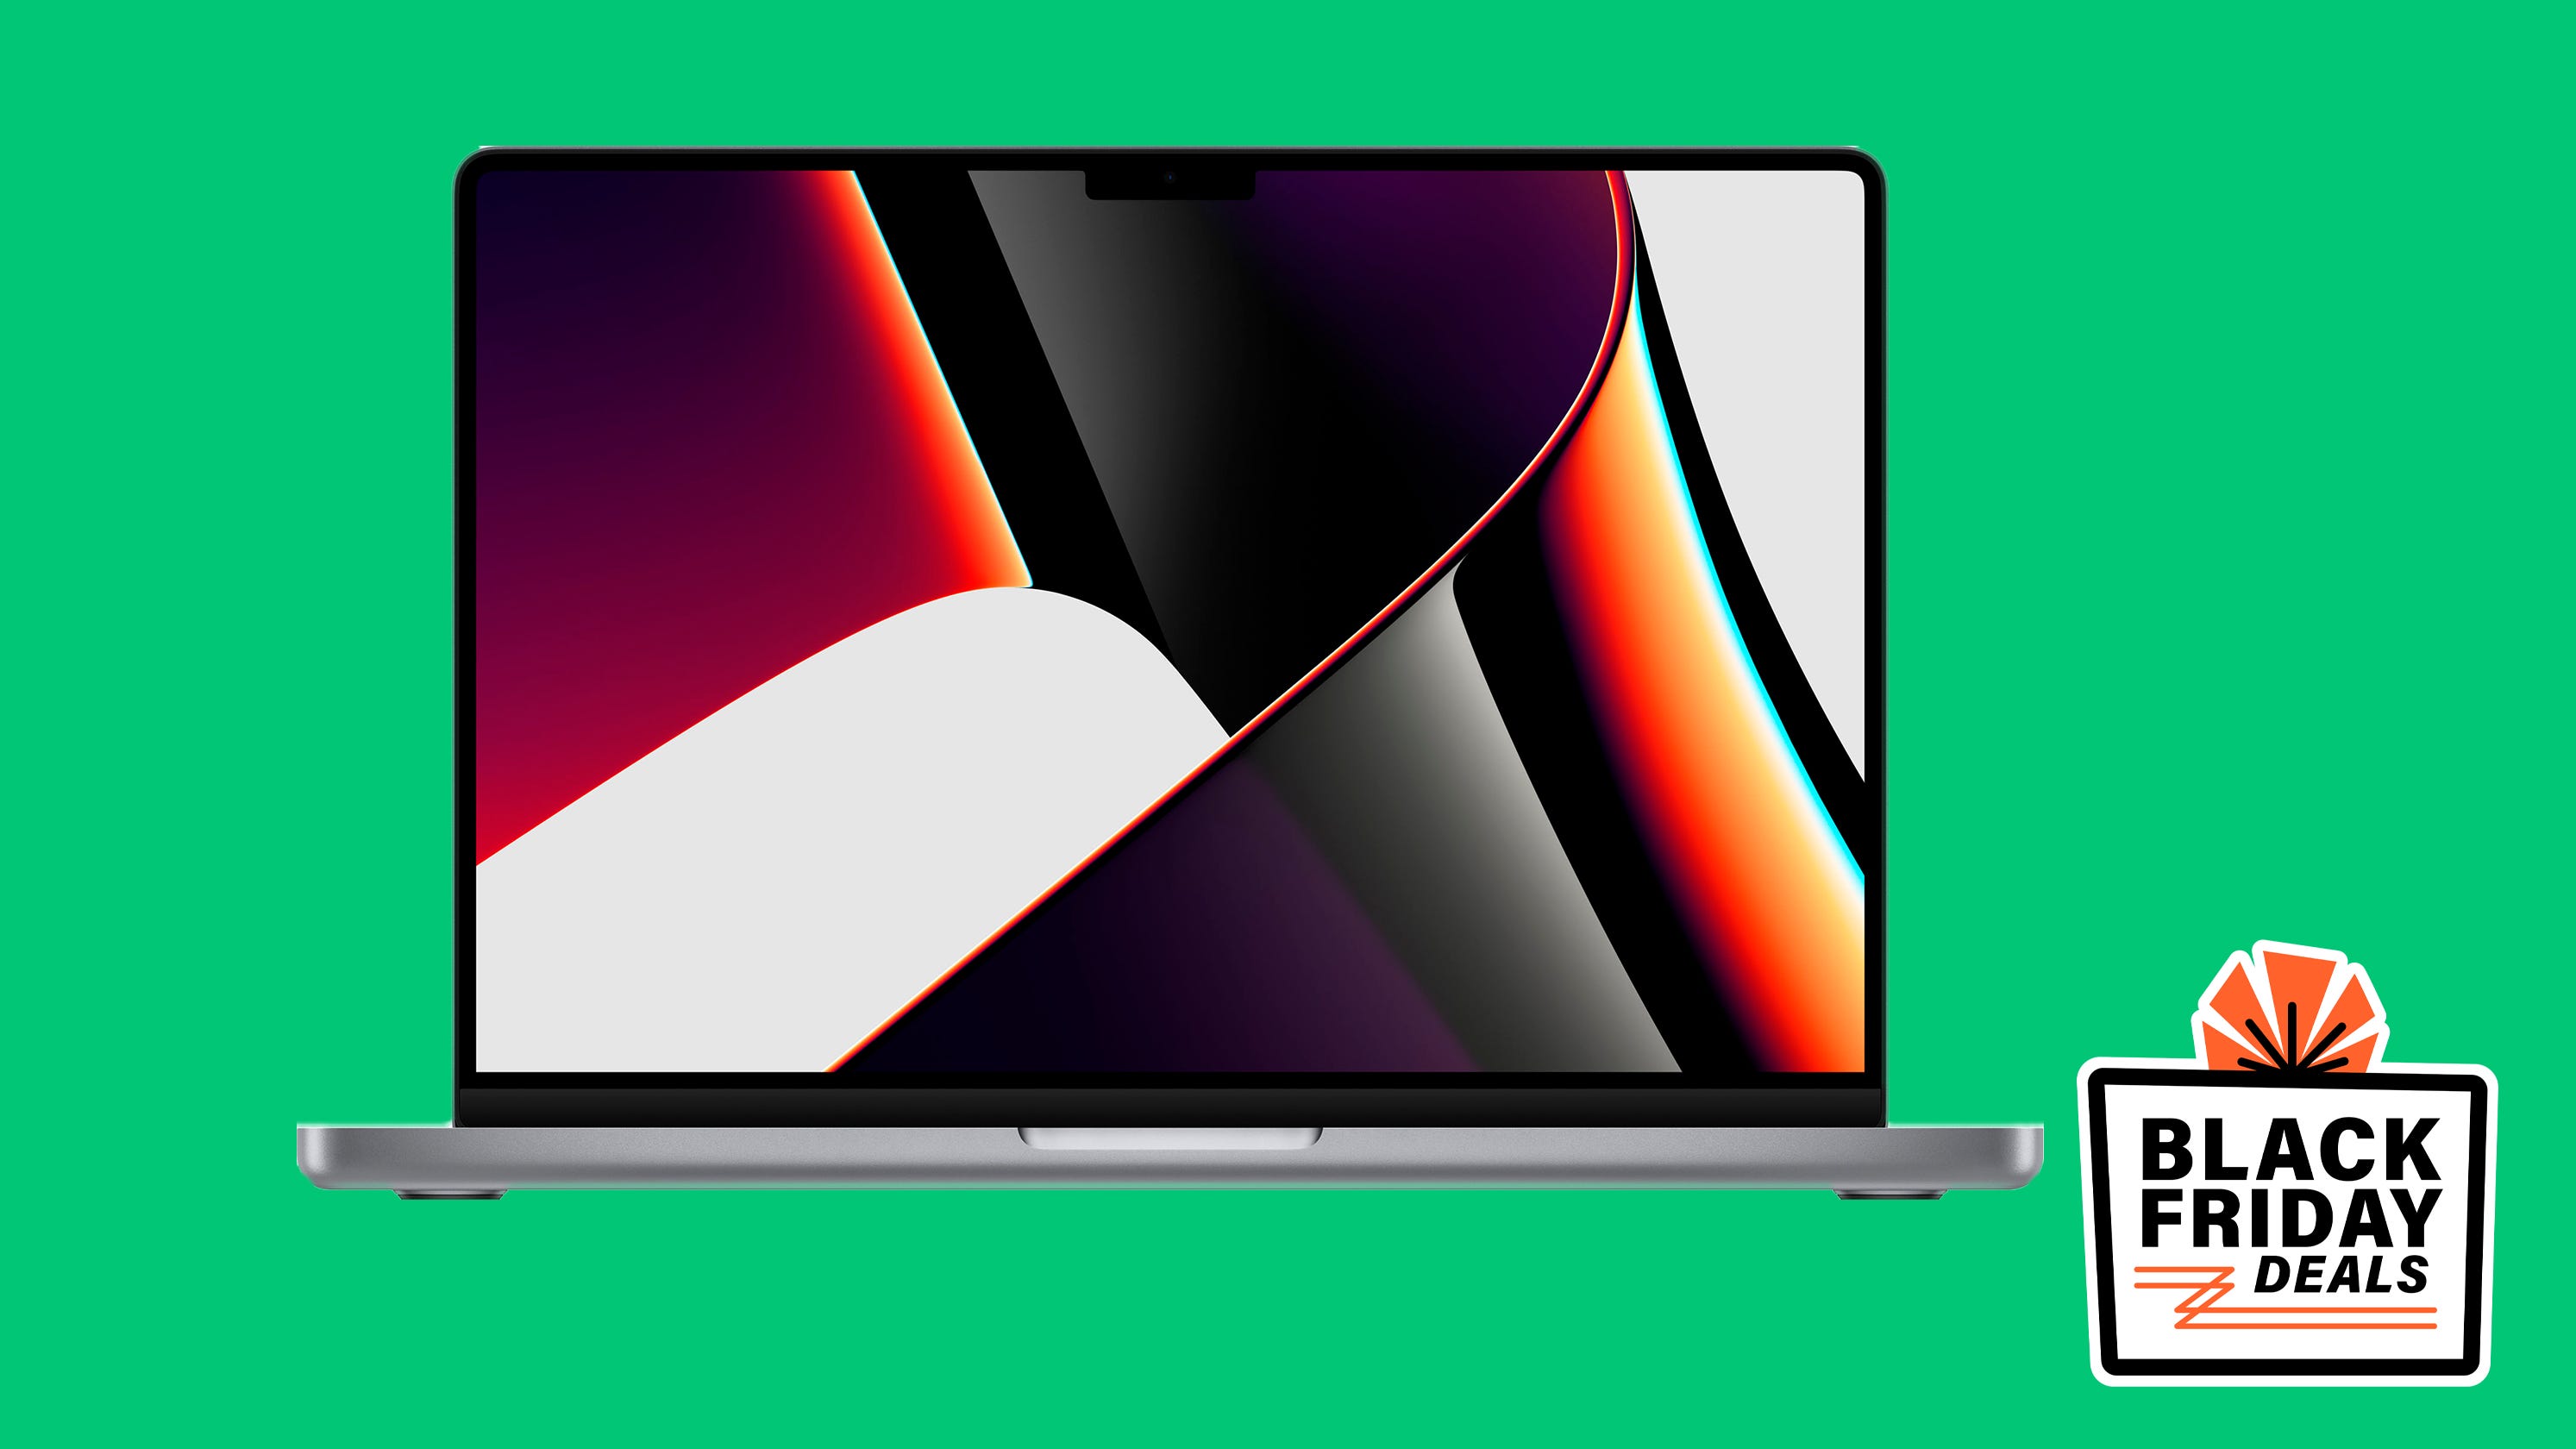 MacBook Air Black Friday deals Save 200 on this Apple laptop